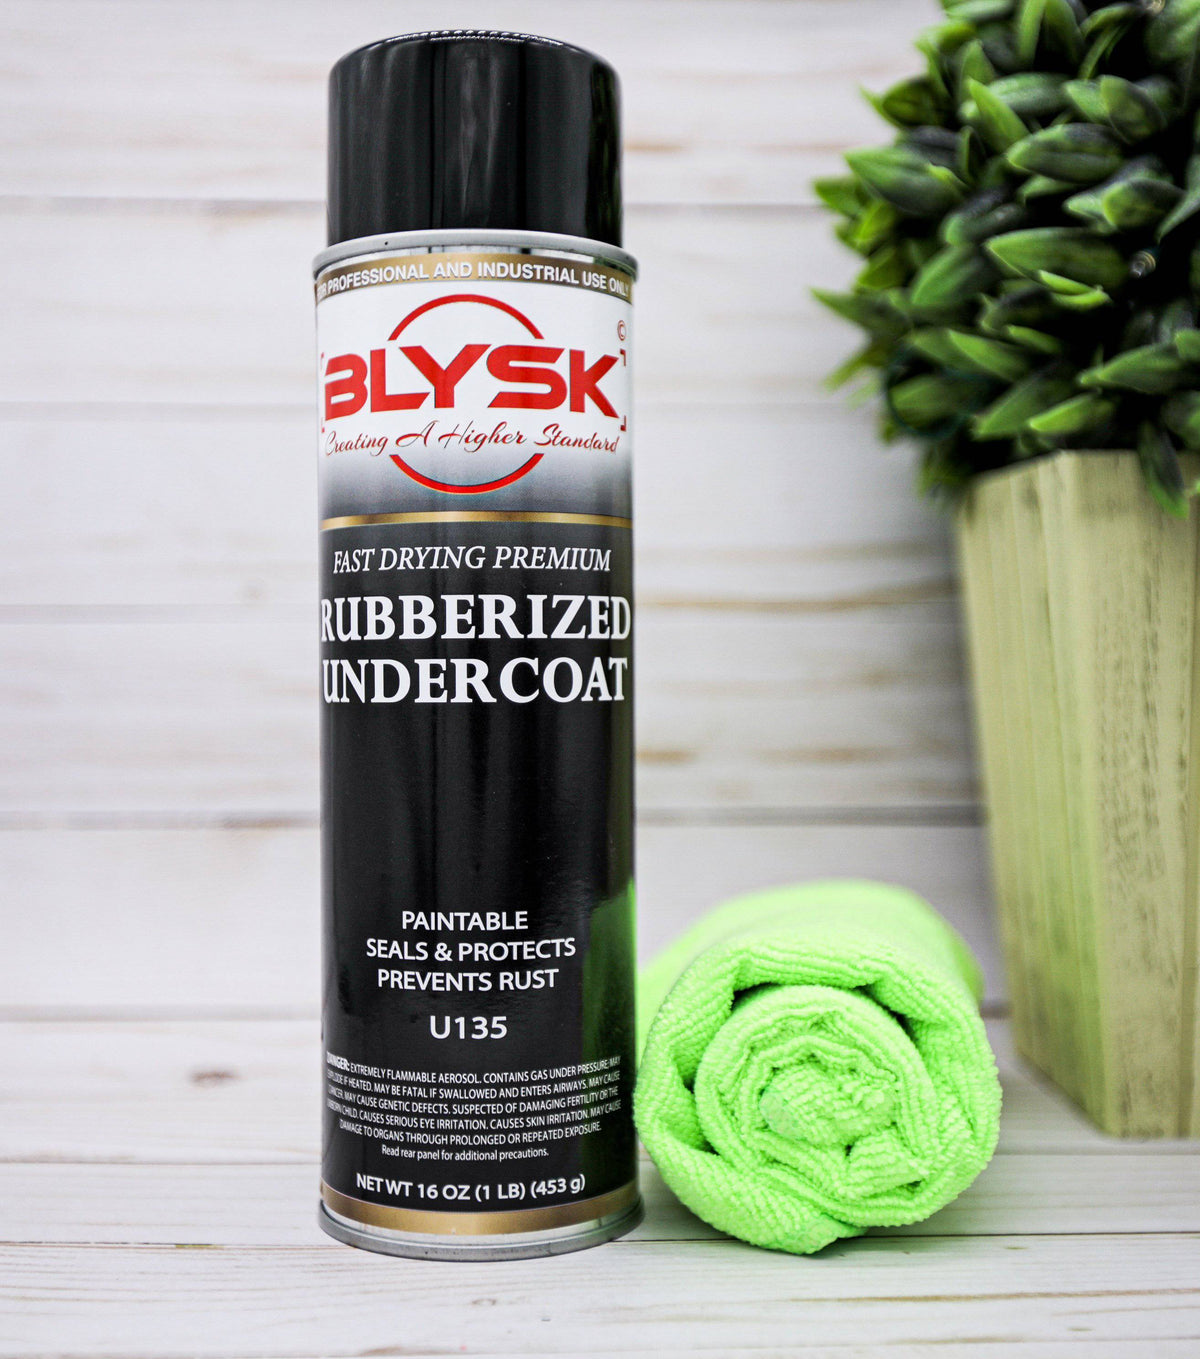 Blysk-Bundle-(2) Spray Max 2K Clear Matte, Develop for The Small Damage Repair -Blysk Prep Cleaner, Wax and Grease Remover